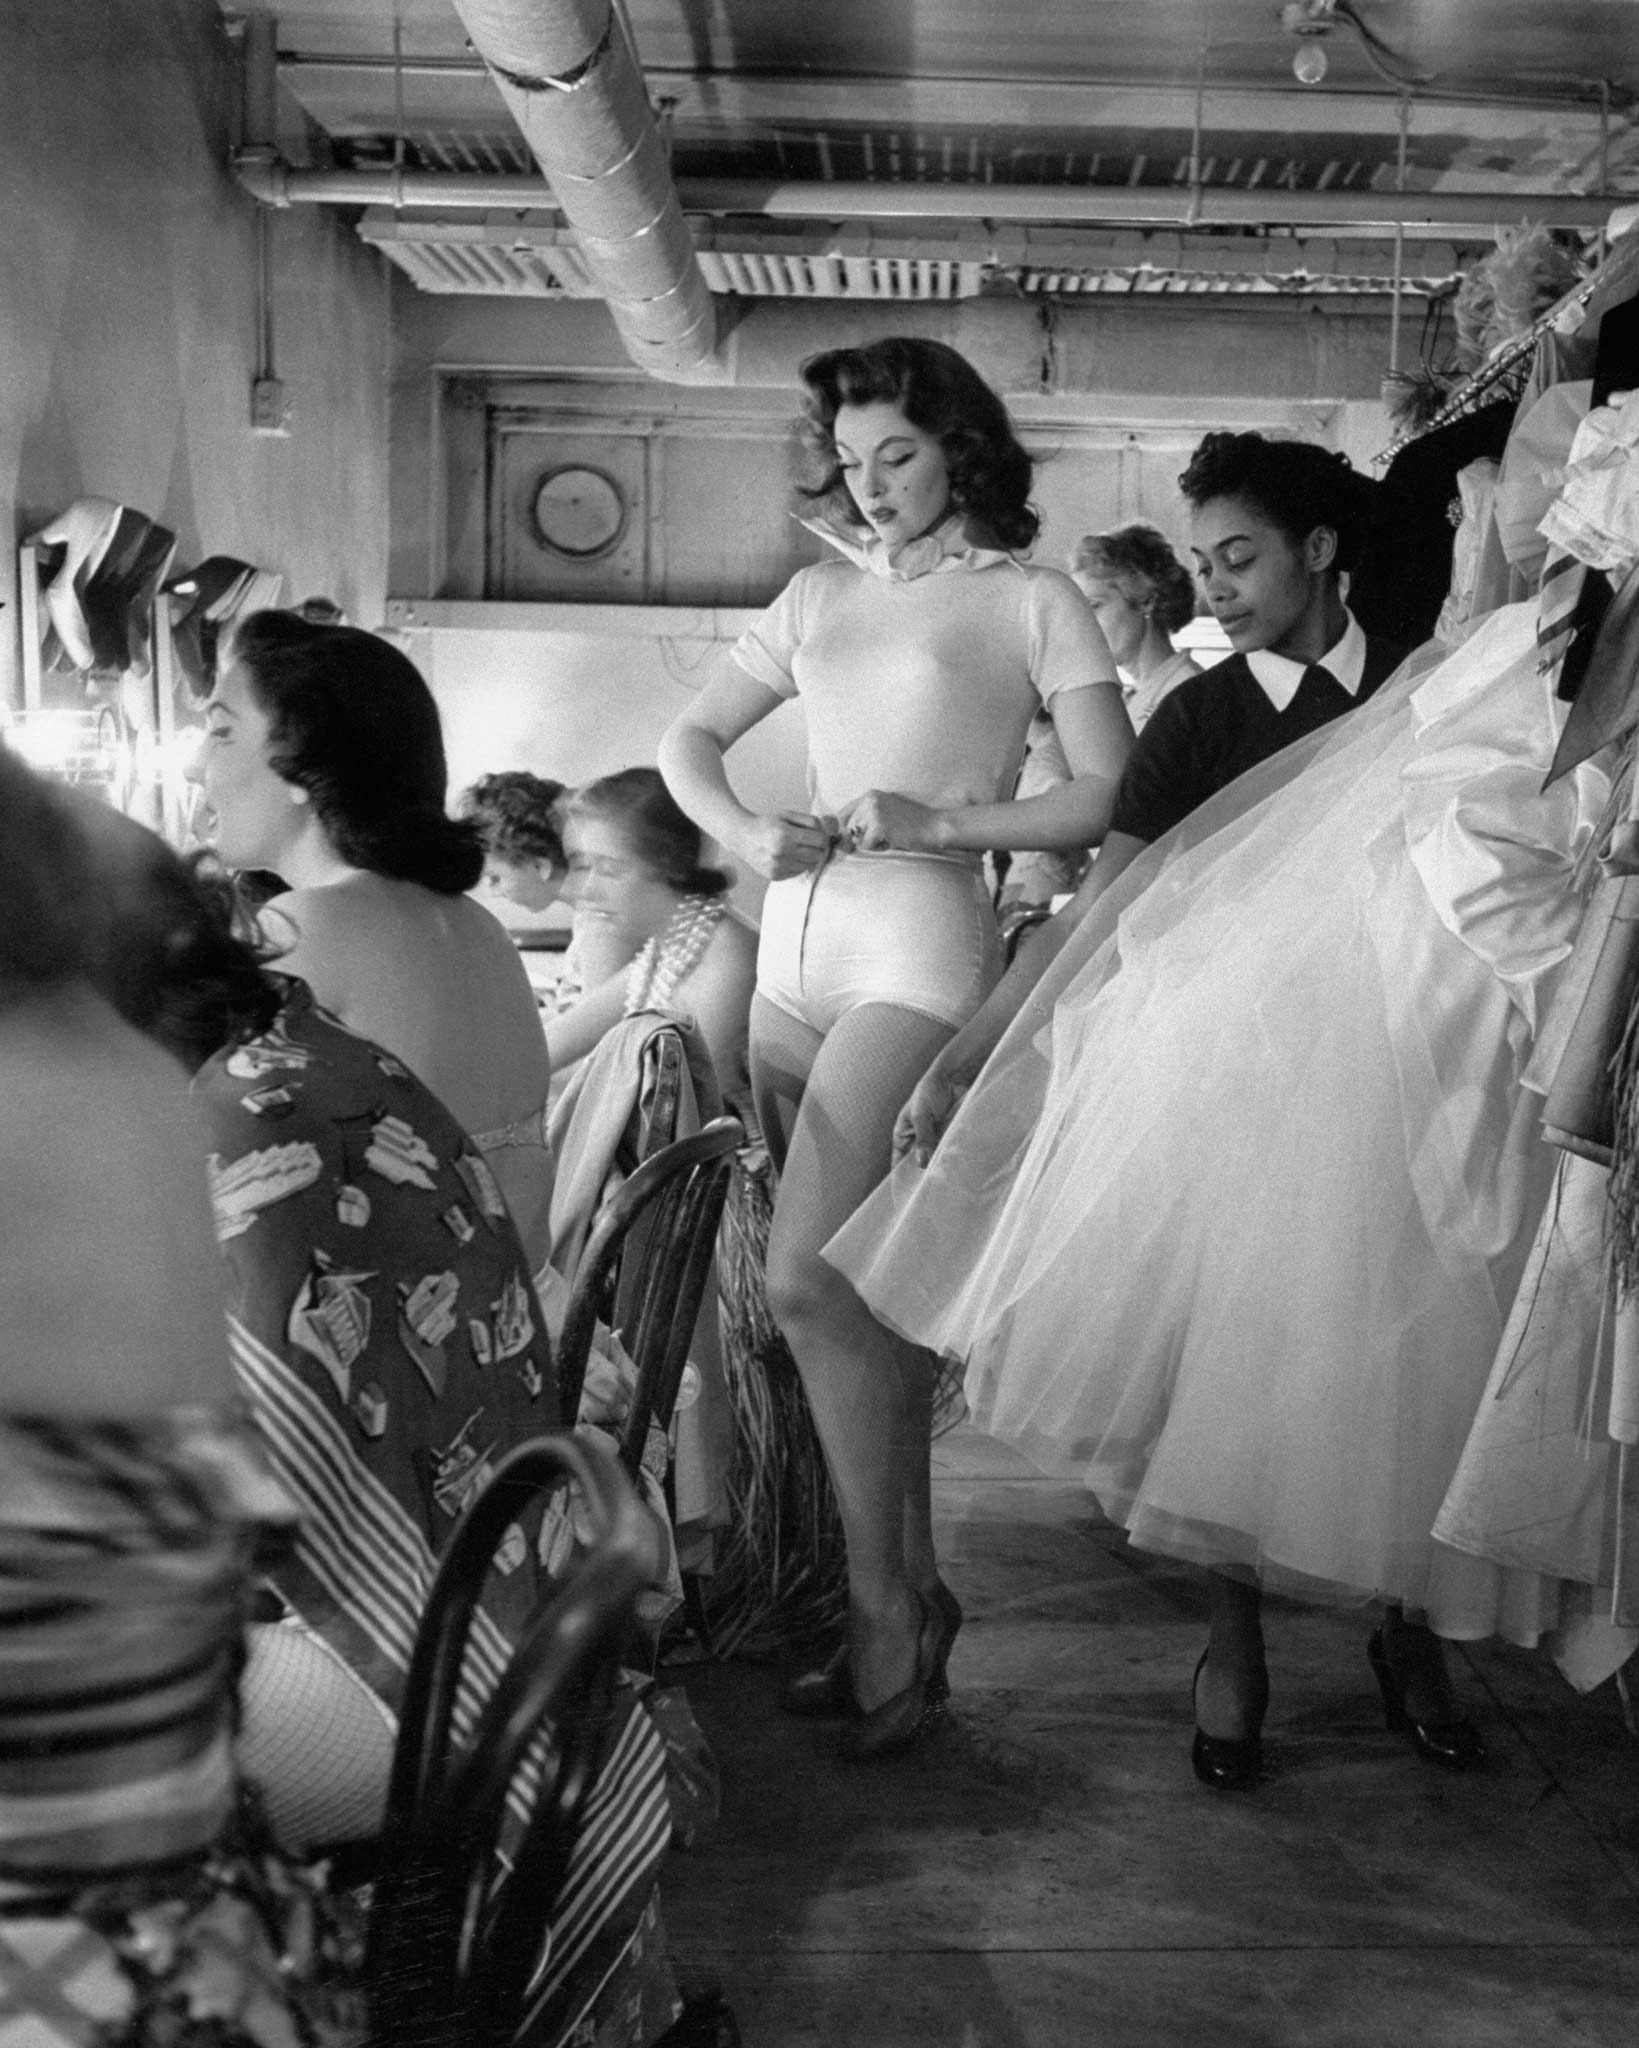 Tina Myers (later known as Tina Louise, of Gilligan's Island fame) comes out at a New York cotillion in 1953.